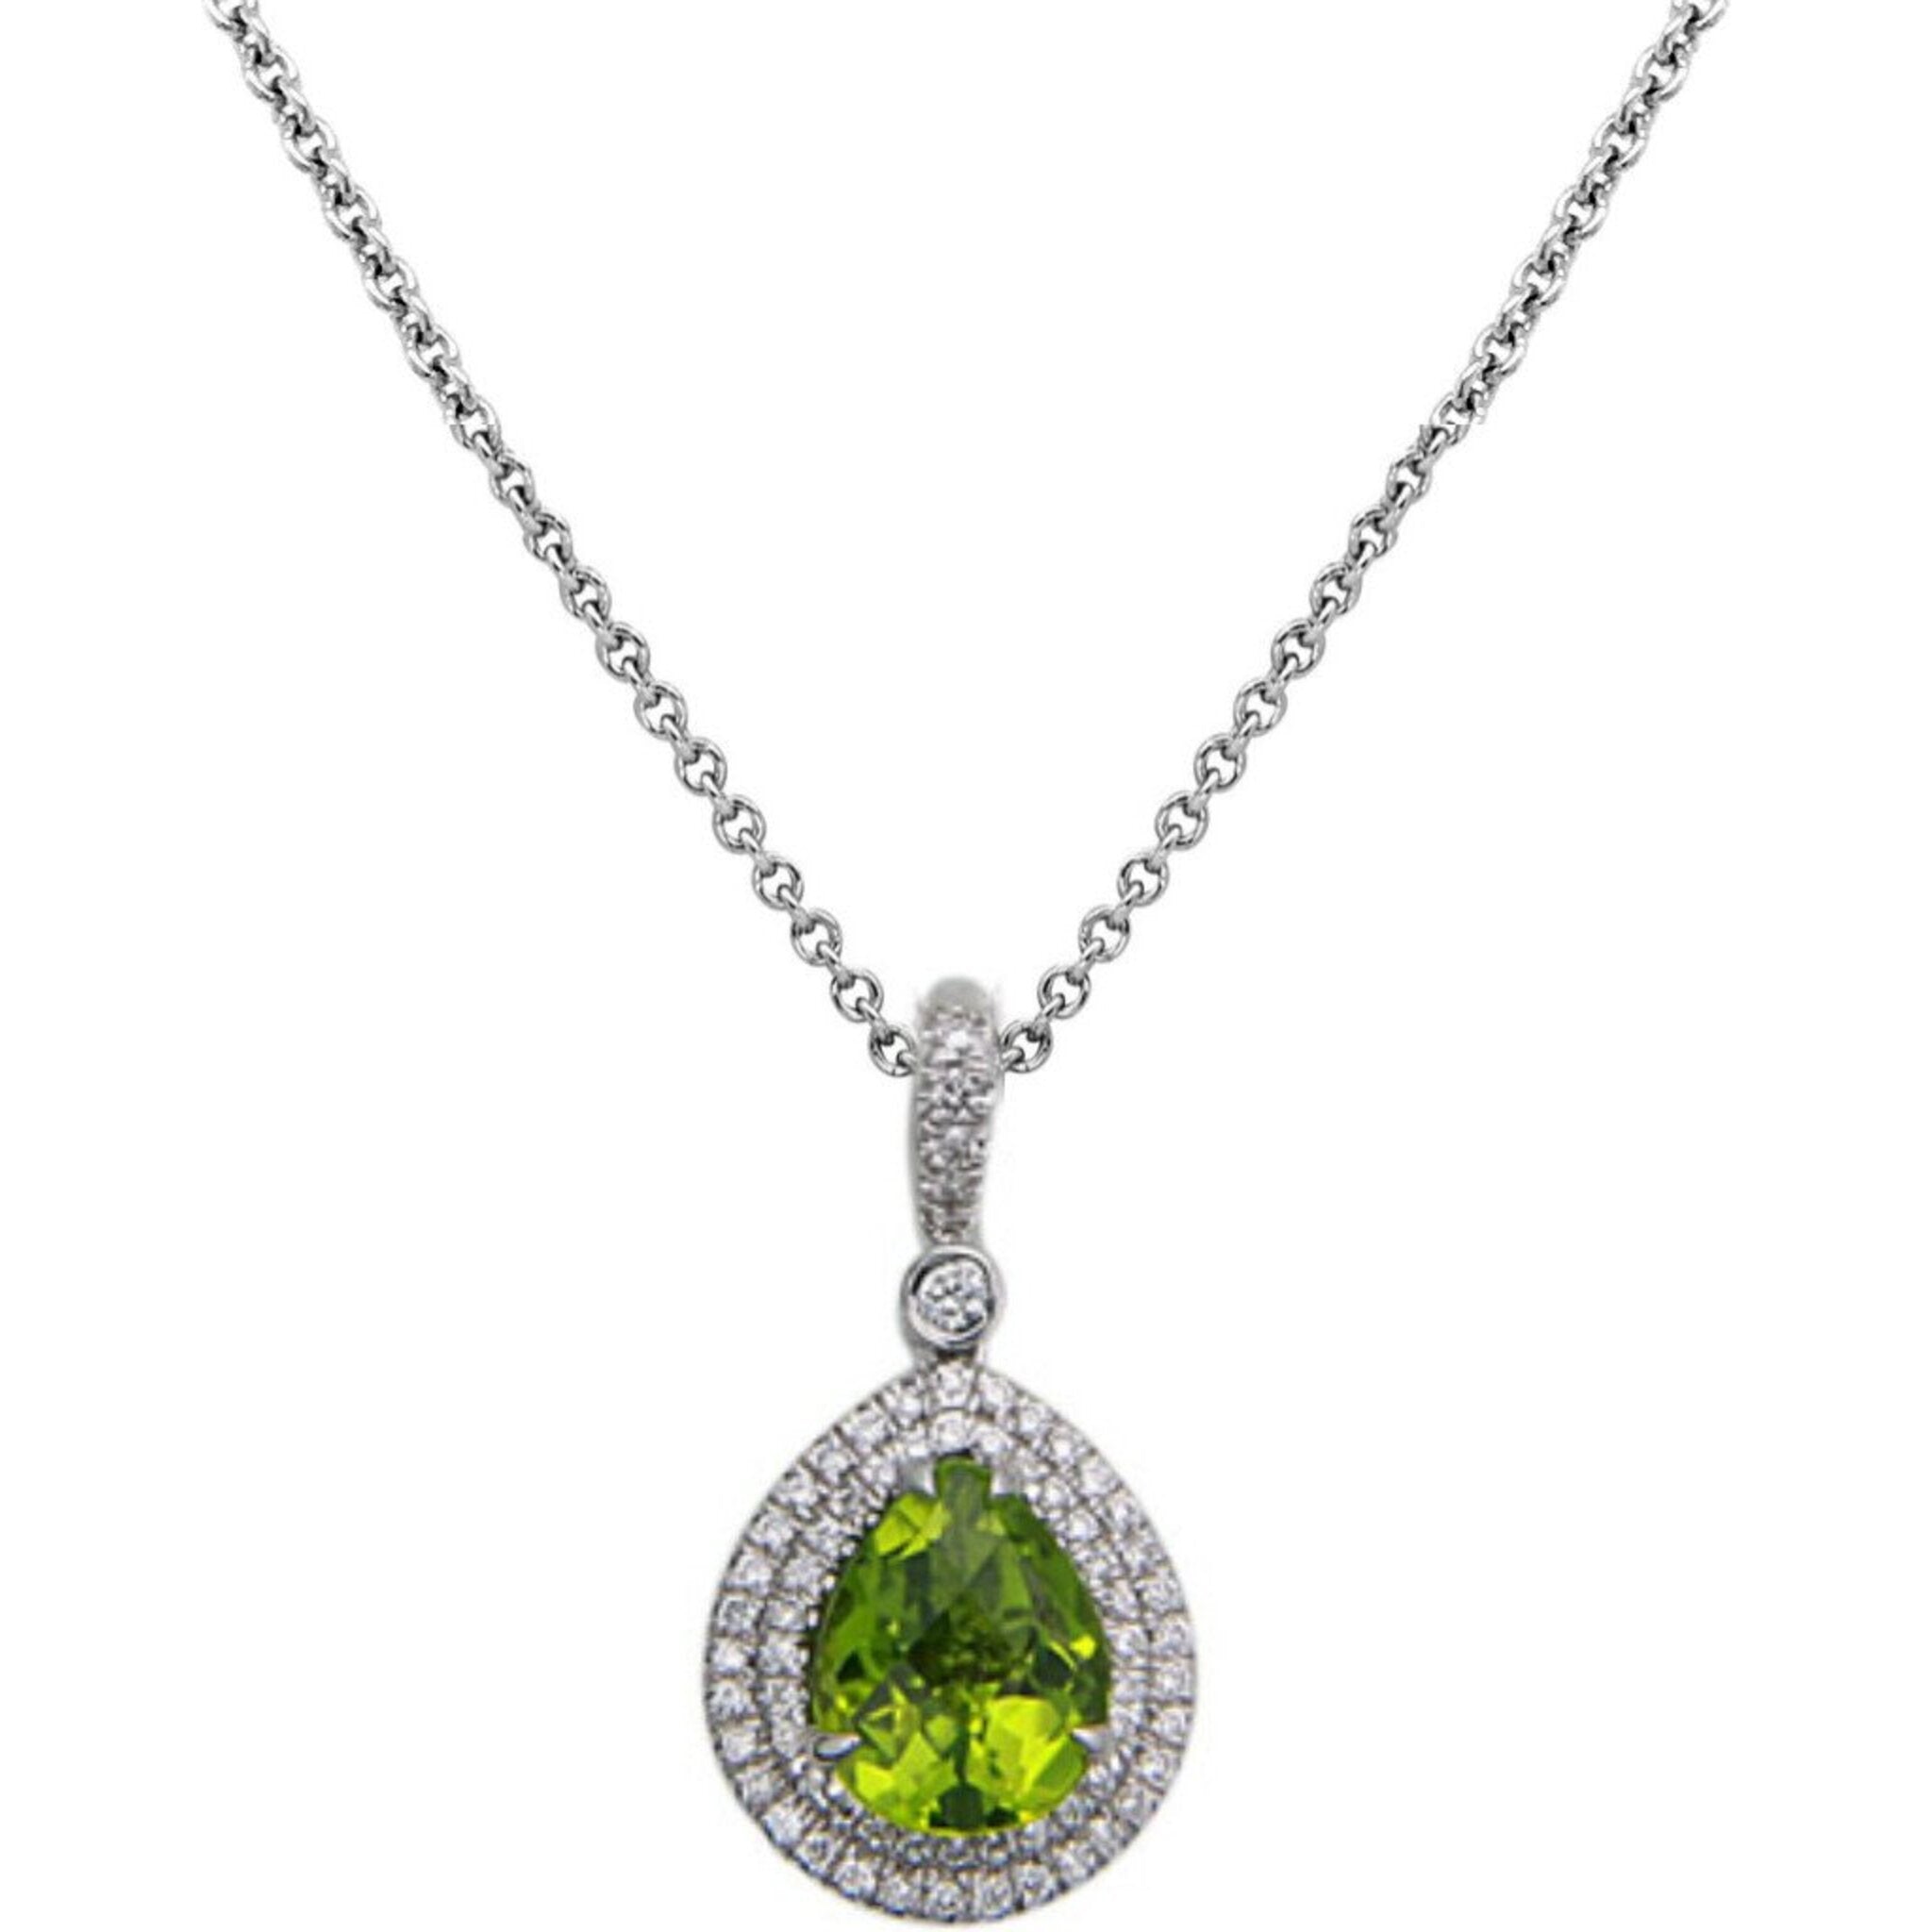 Charles Krypell - Pastel Diamond Double Halo Pear-Shape Reversible Necklace - Peridot